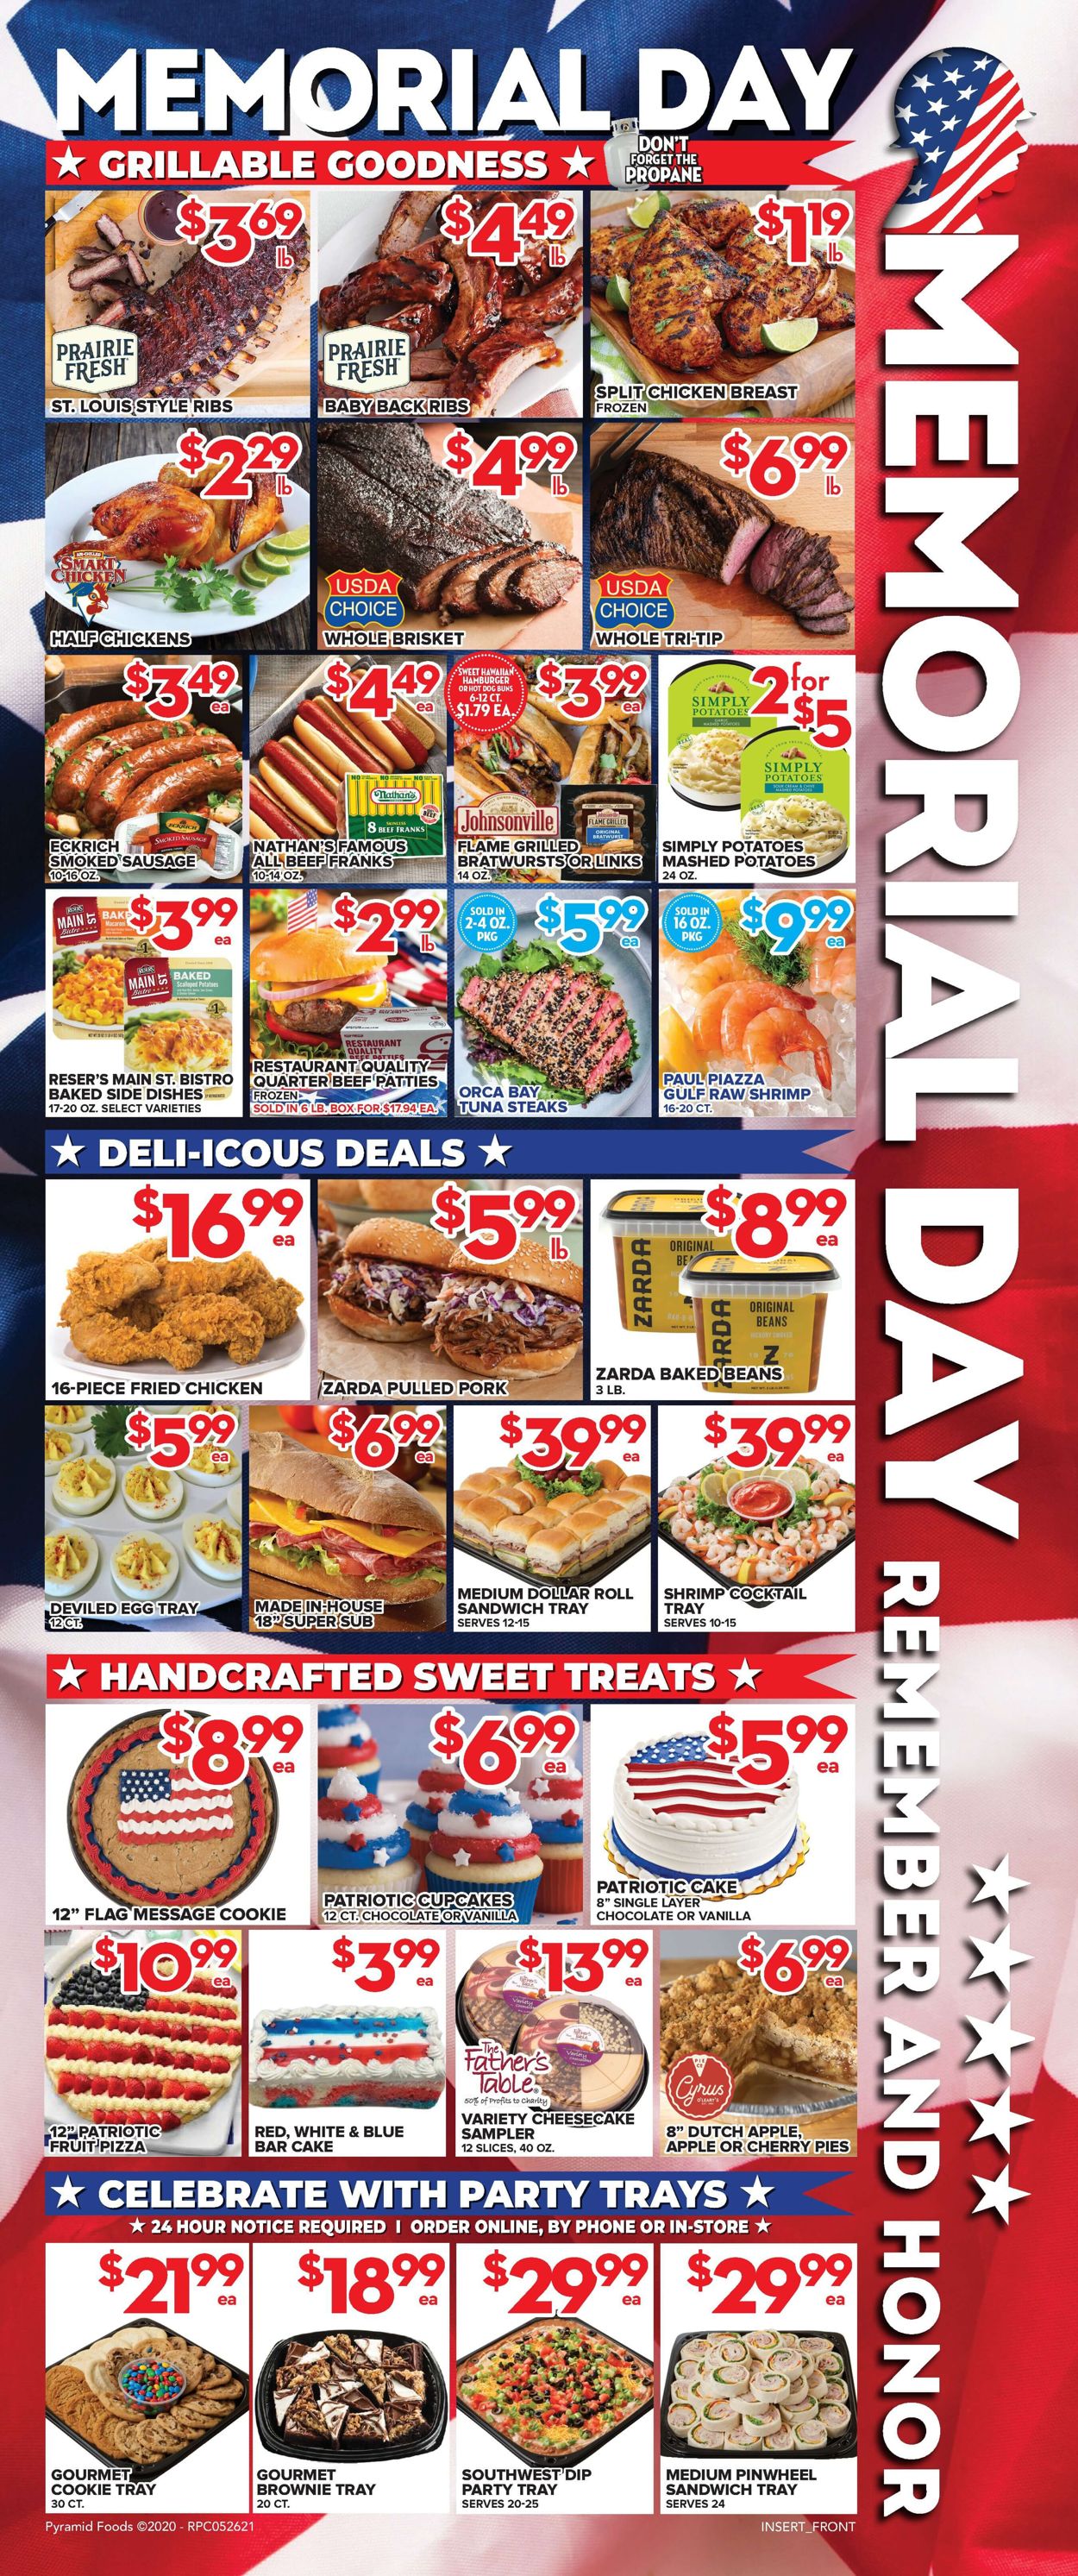 Price Cutter Weekly Ad Circular - valid 05/26-06/01/2021 (Page 3)